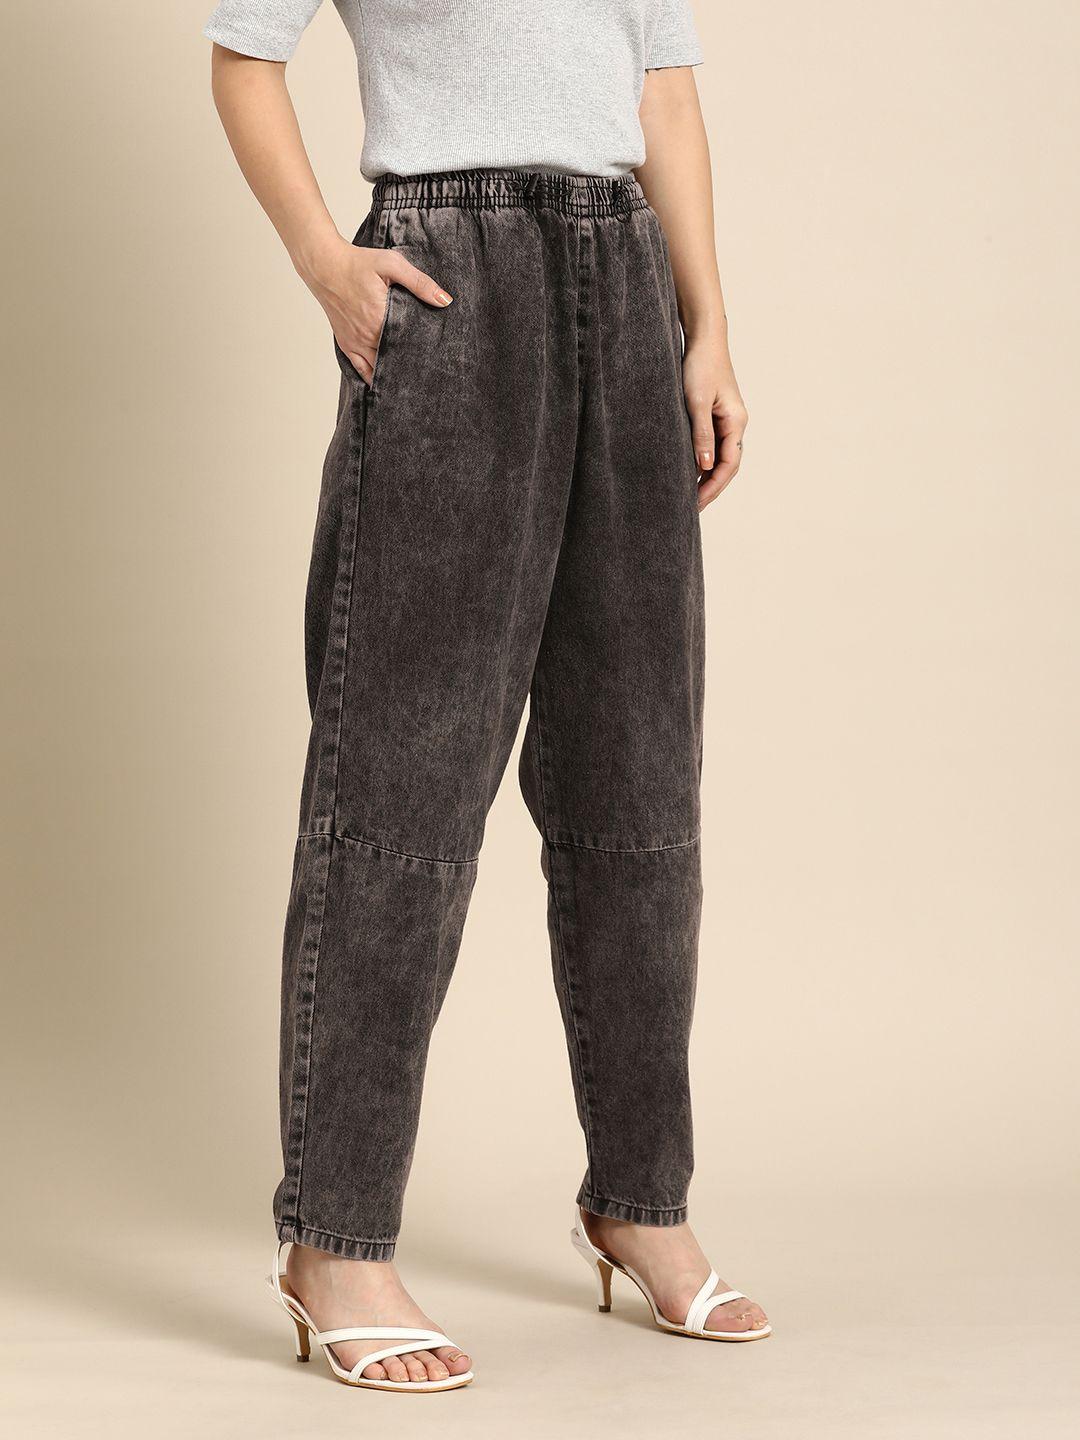 all-about-you-women-charcoal-light-fade-cotton-jogger